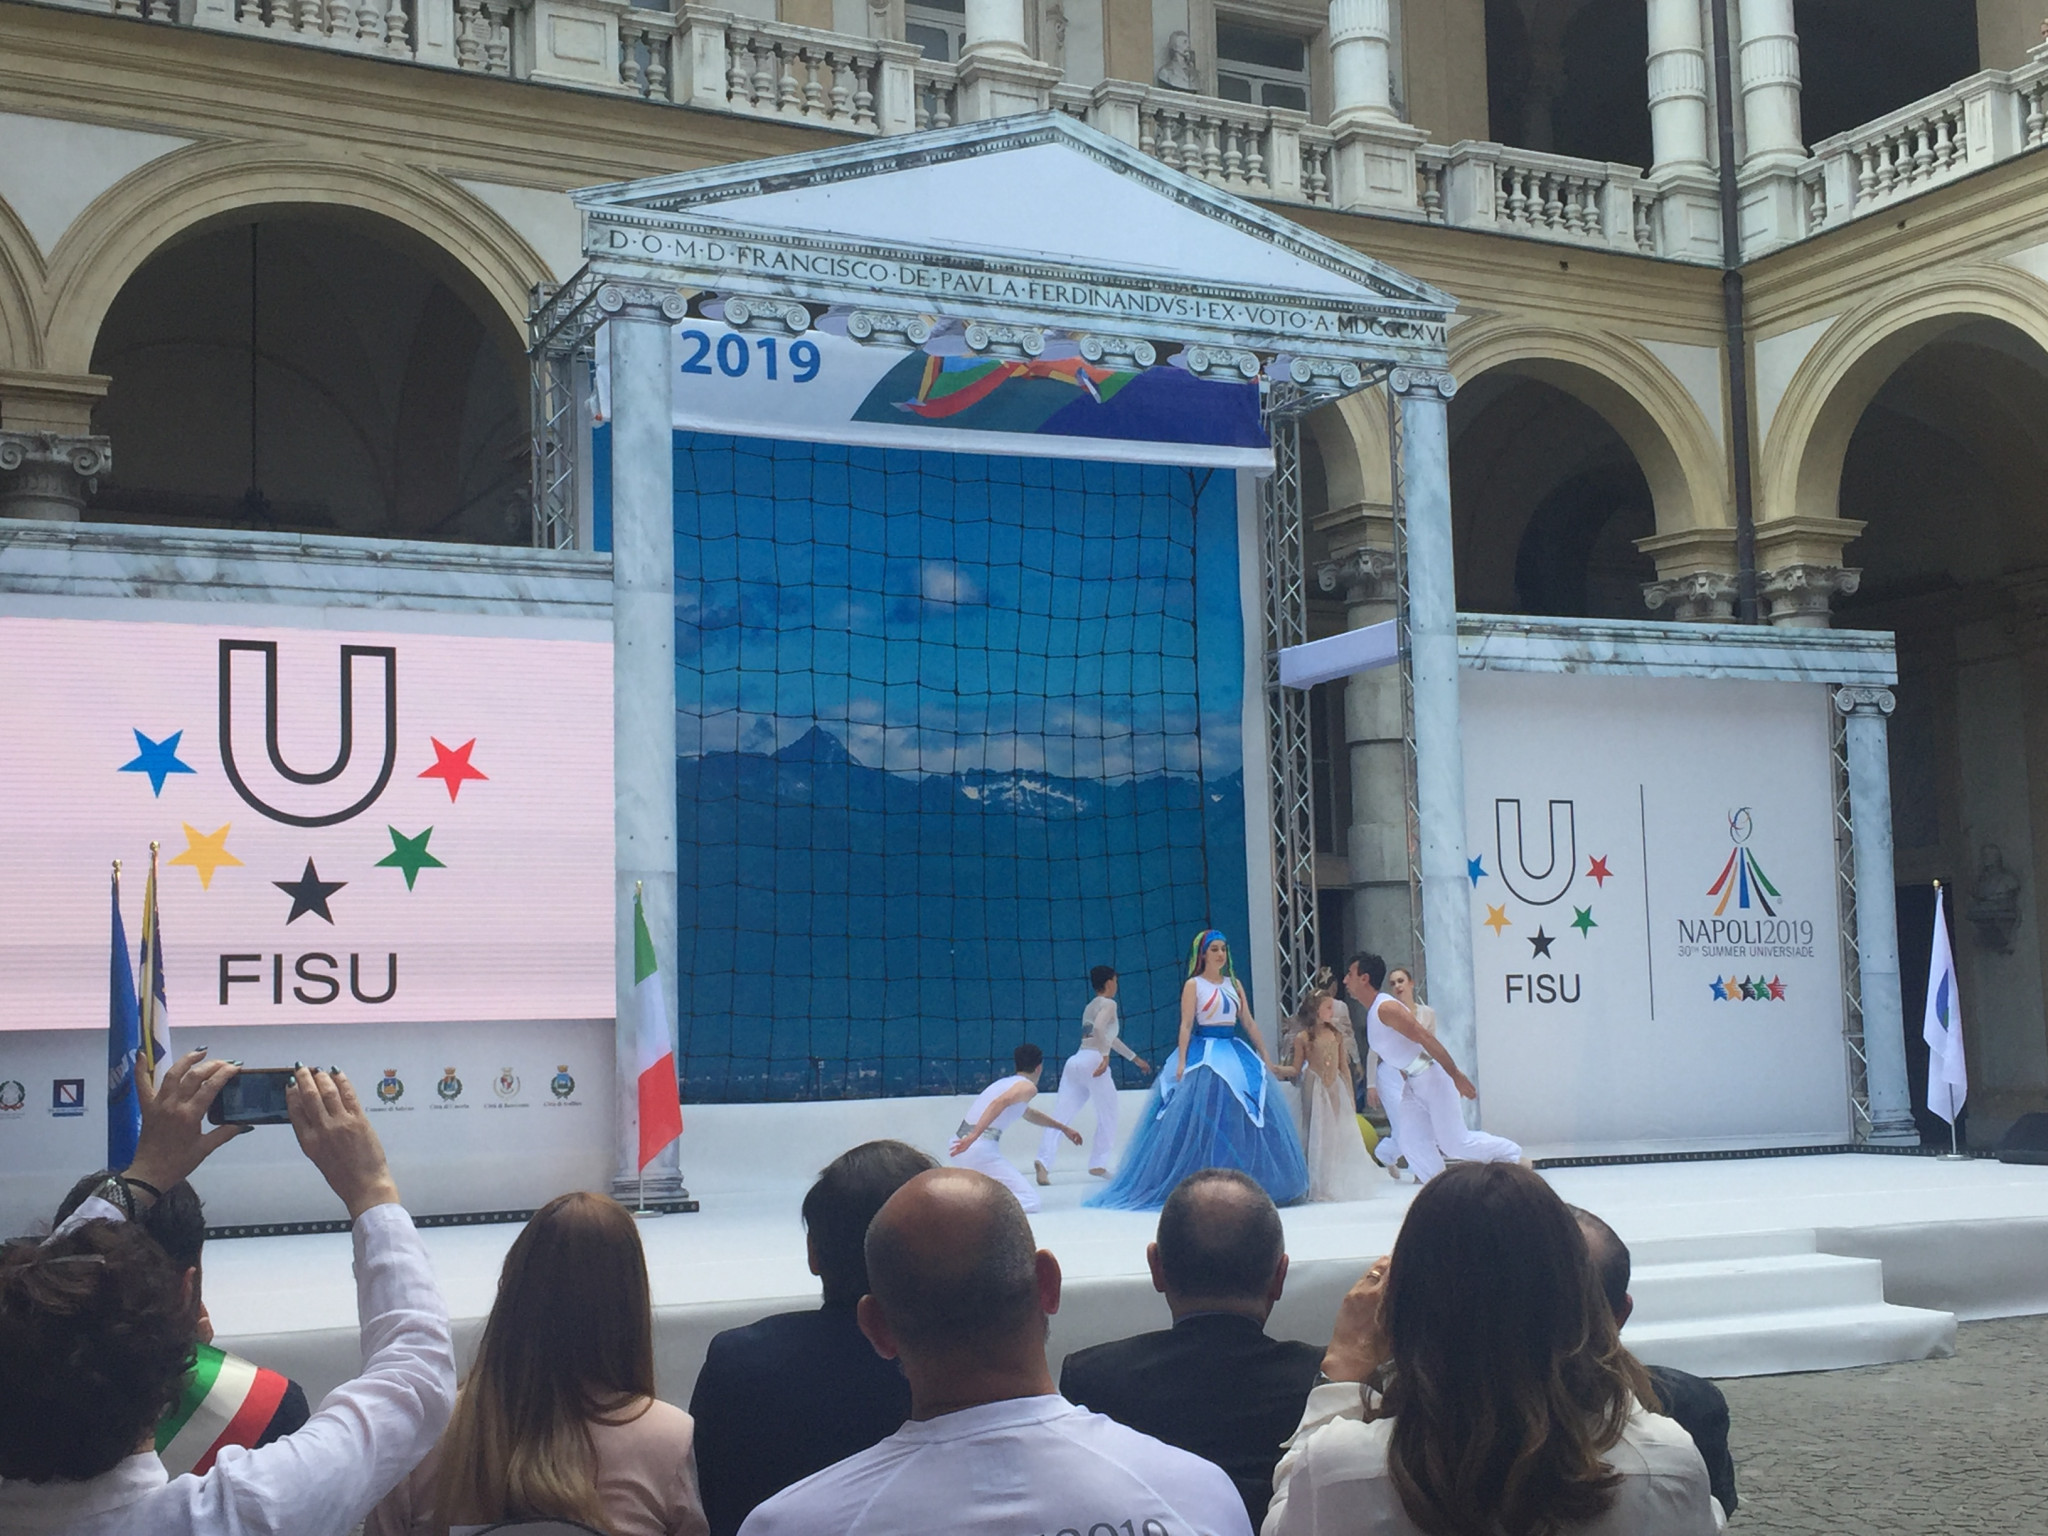 During the Torch Lighting ceremony at the University of Turin, a live performance depicted the Naples 2019 official mascot, a mermaid called Partenope ©ITG